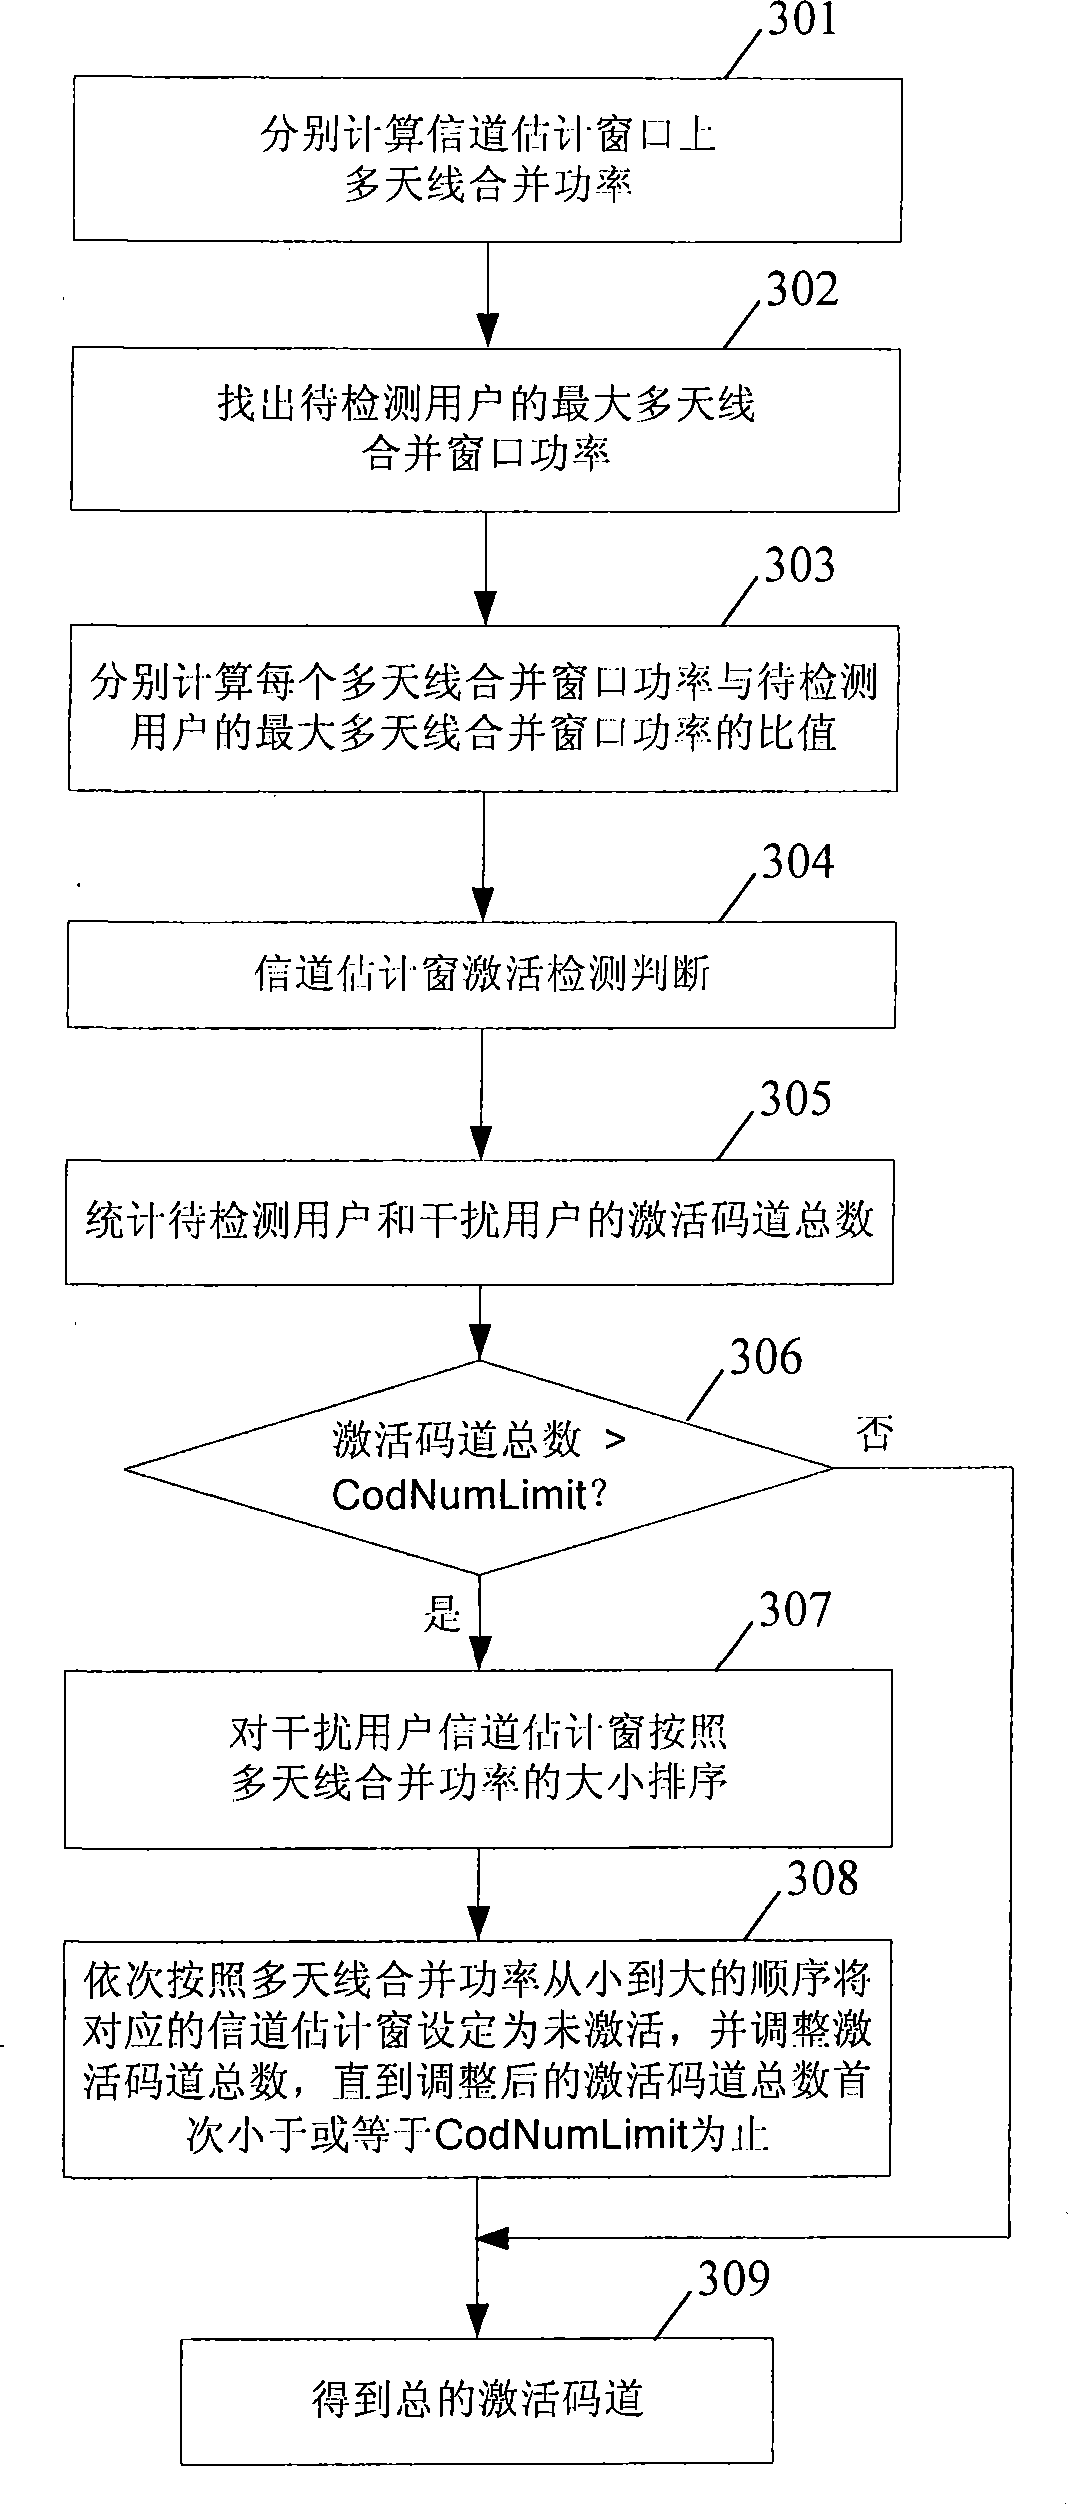 Activation code path detecting method for multi-antenna association detecting system